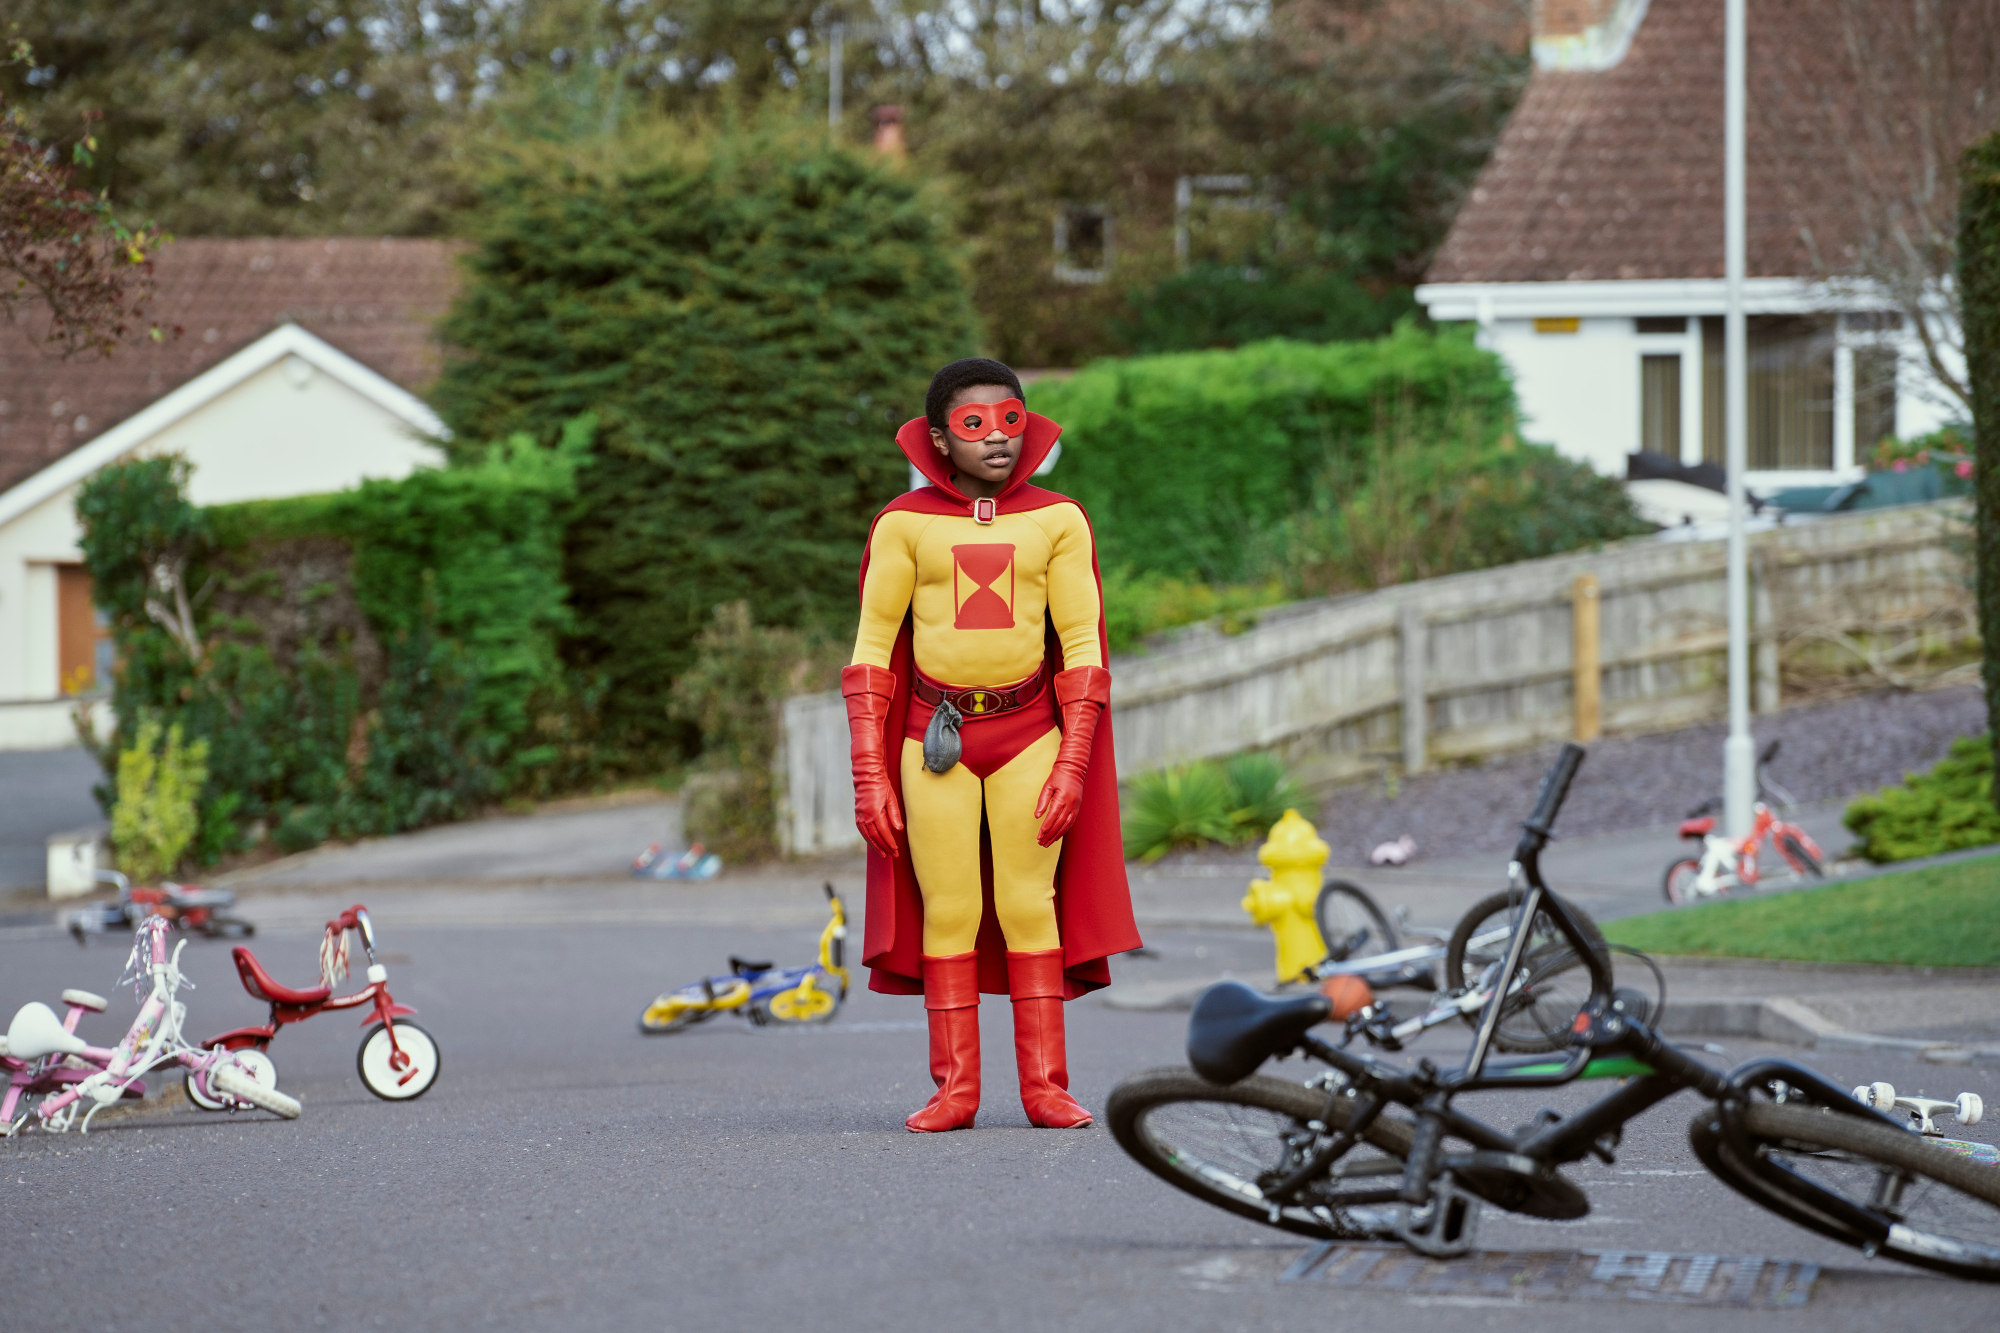 Eddie Karanja as Jed Walker in 'The Sandman.' He's wearing a yellow and red superhero suit and standing on a street with bikes tossed in it.